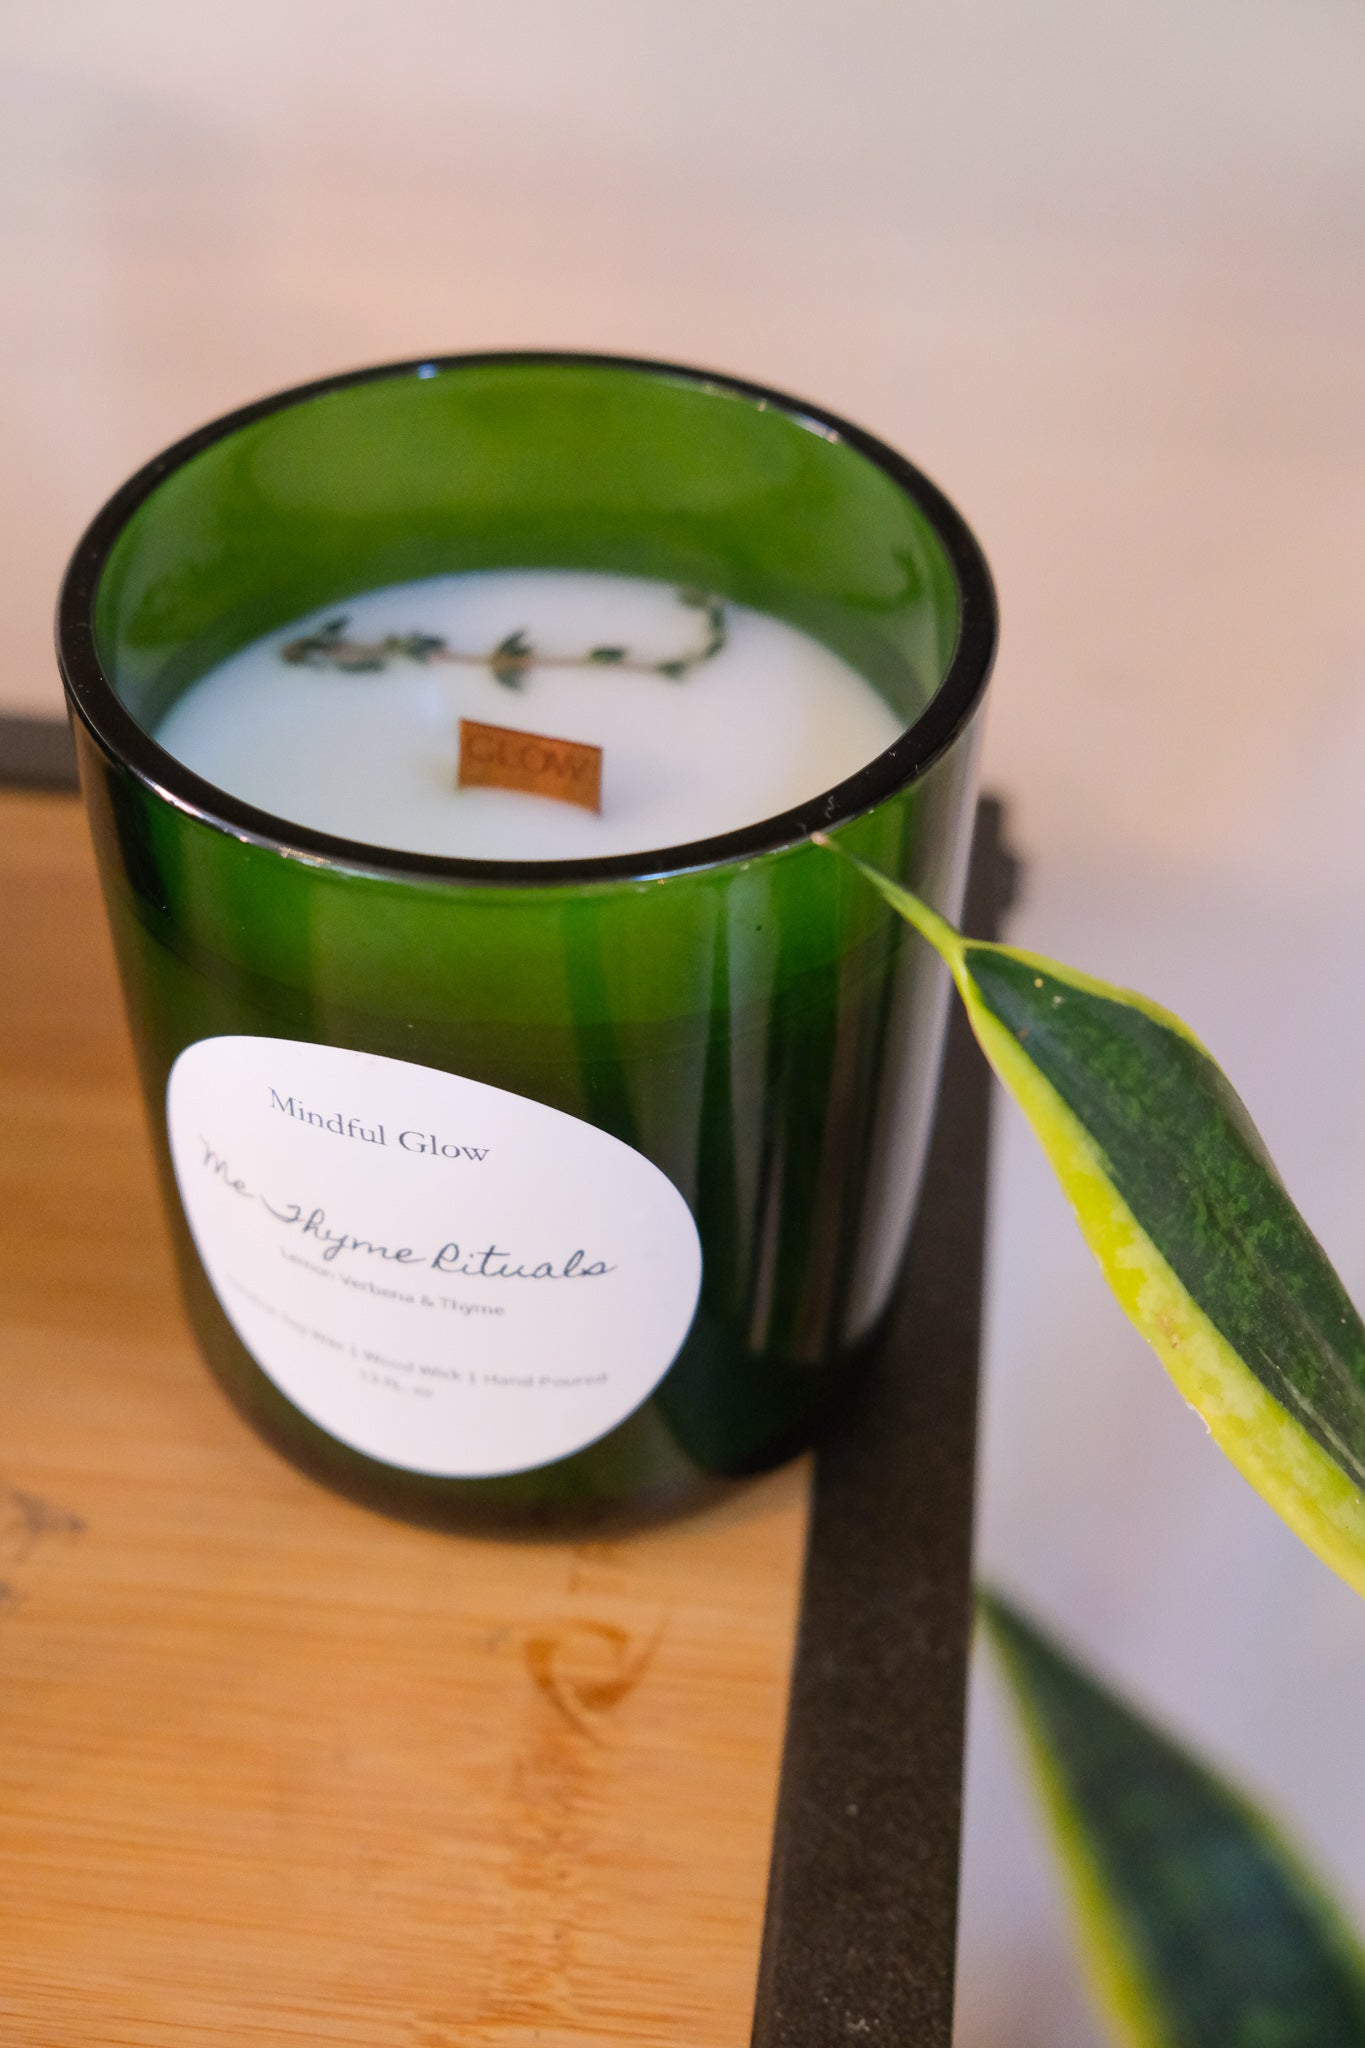 Mindful Glow - Me Thyme Rituals Candle 13oz – Wicked Scents